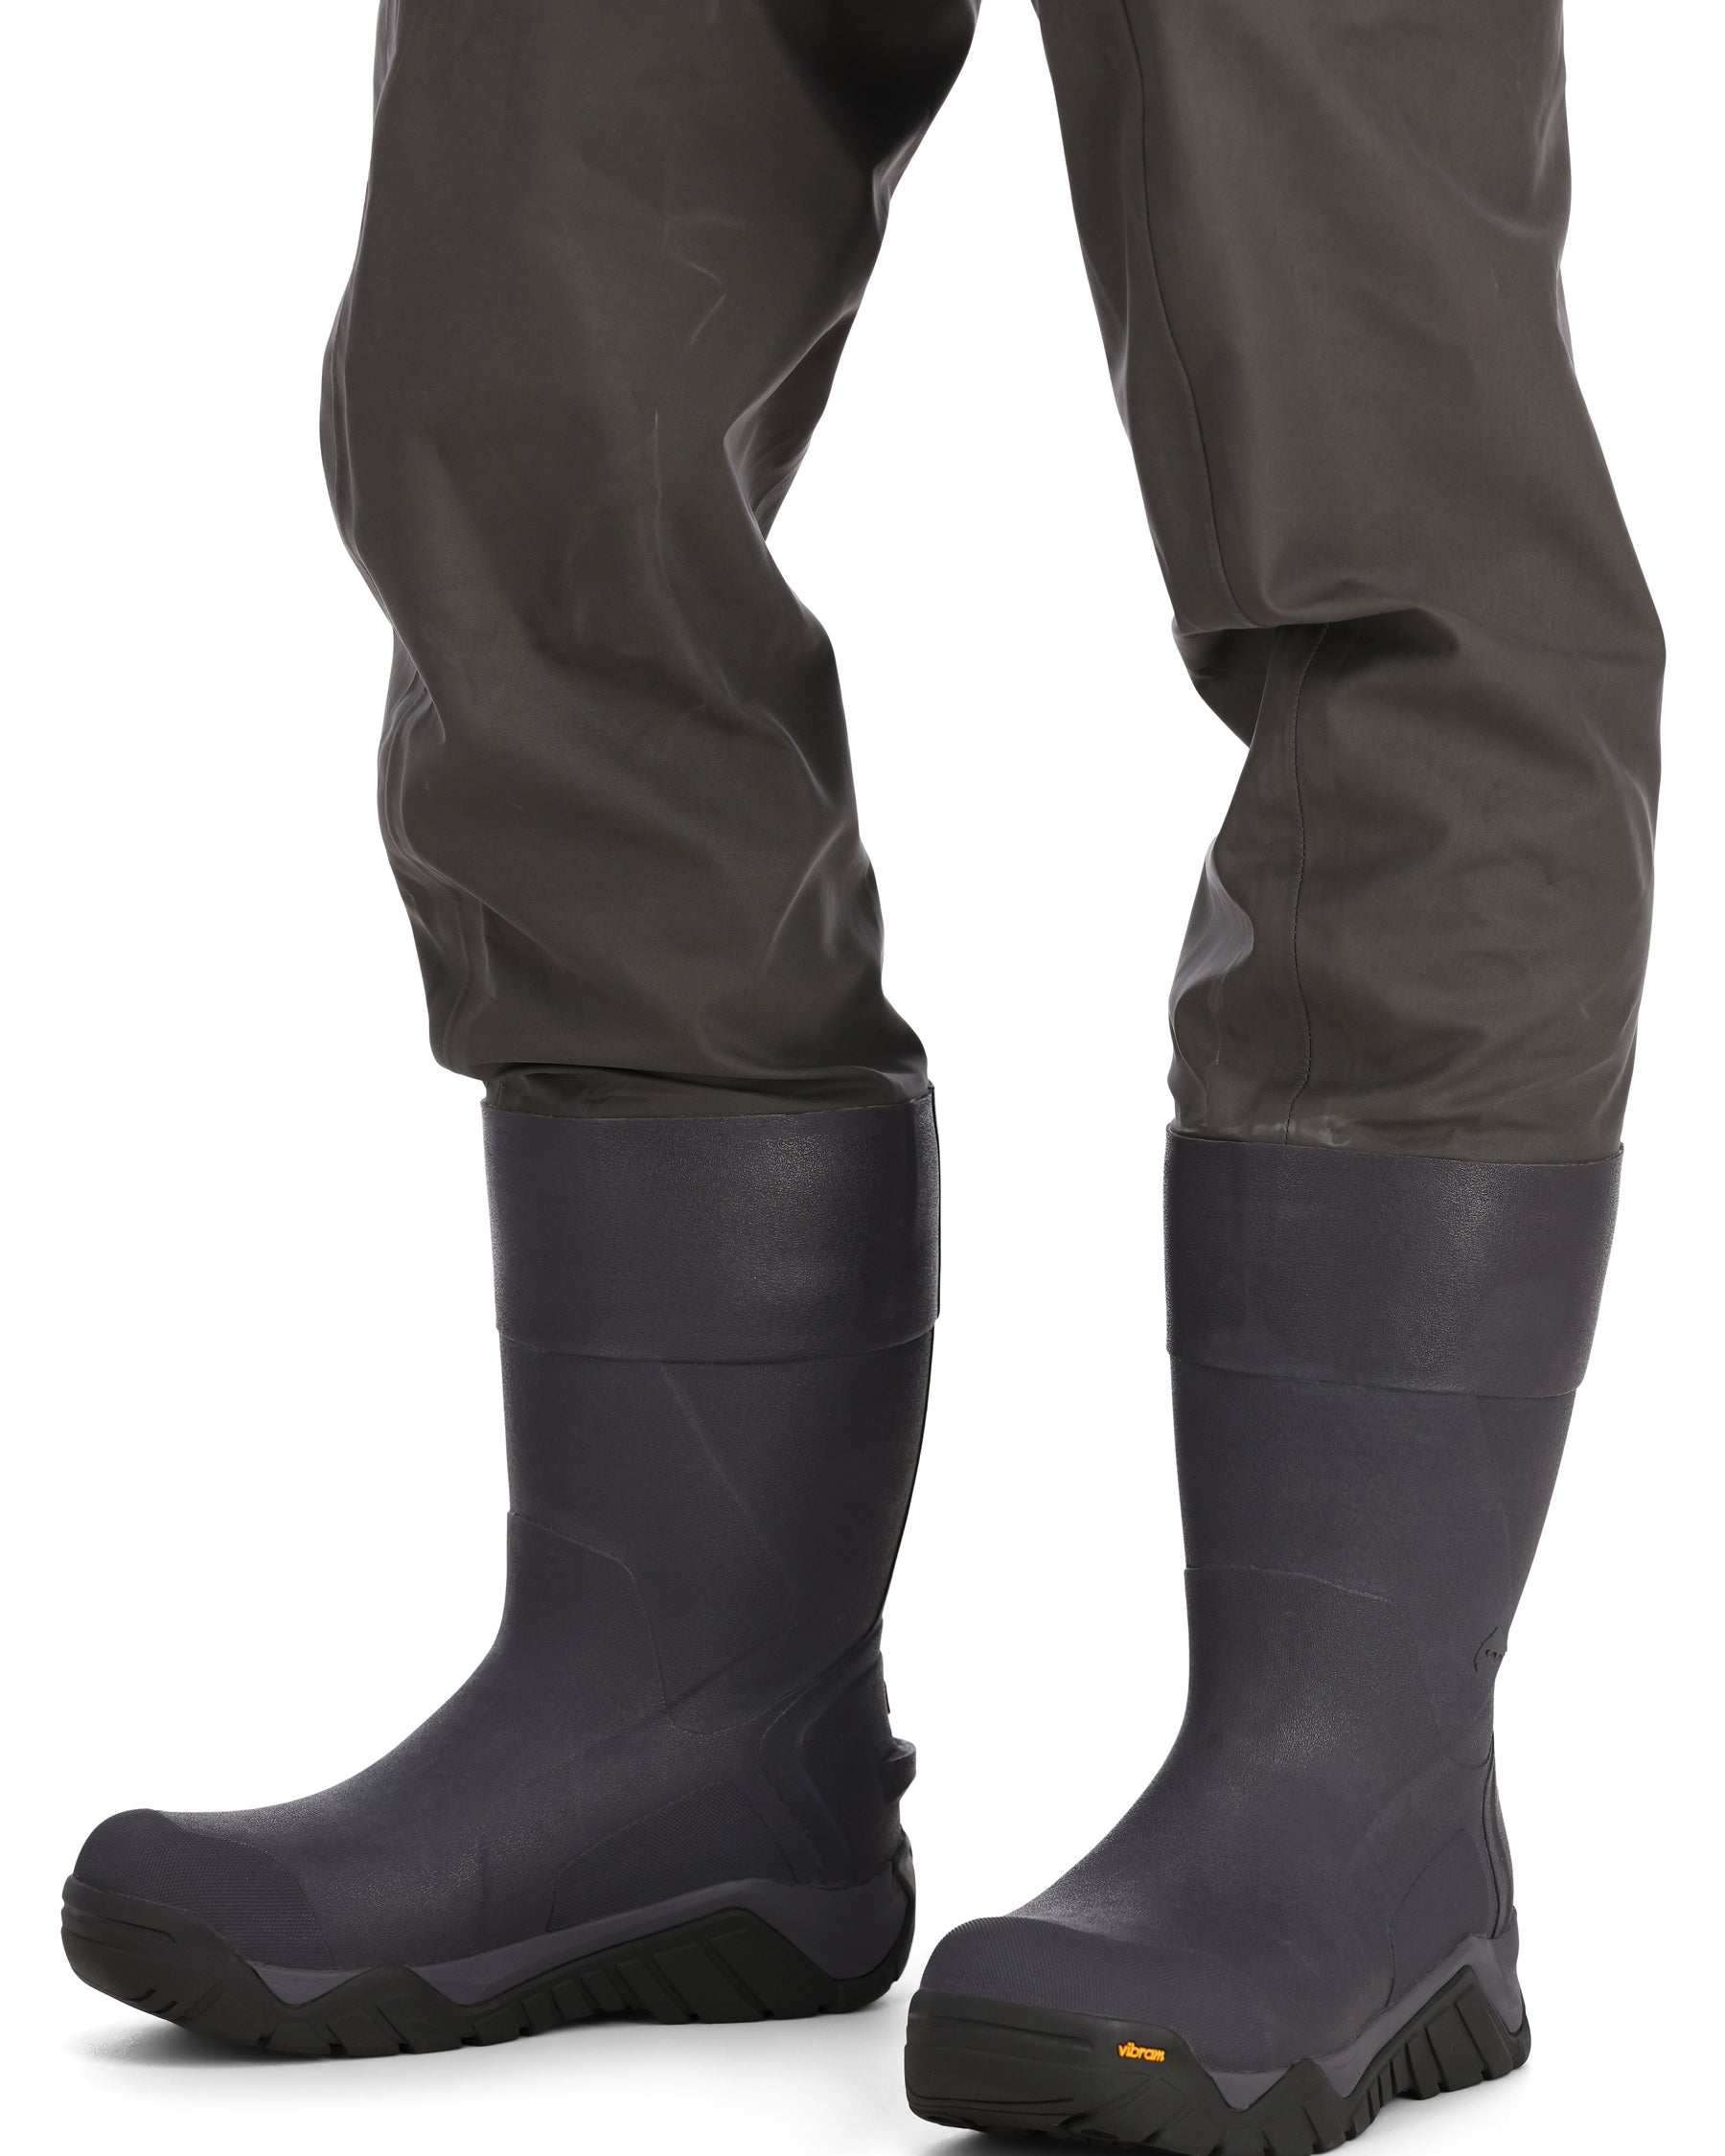 M's G3 Guide Waders - Bootfoot - Vibram Sole | Simms Fishing Products